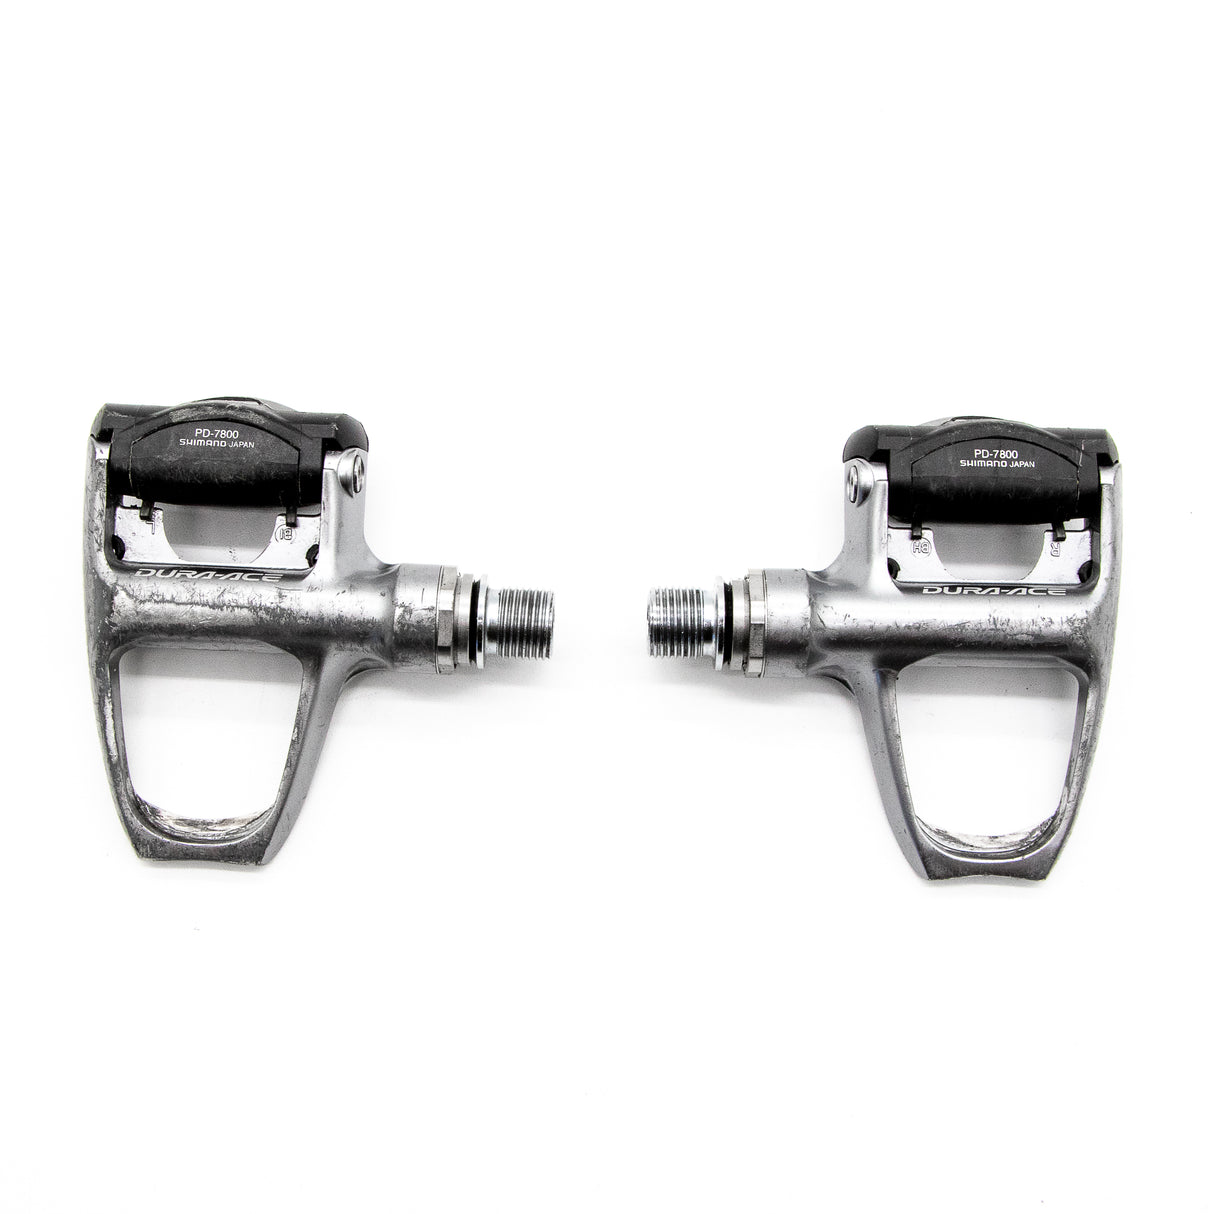 Shimano Dura Ace PD-7800 Clipless Road Pedals 280g